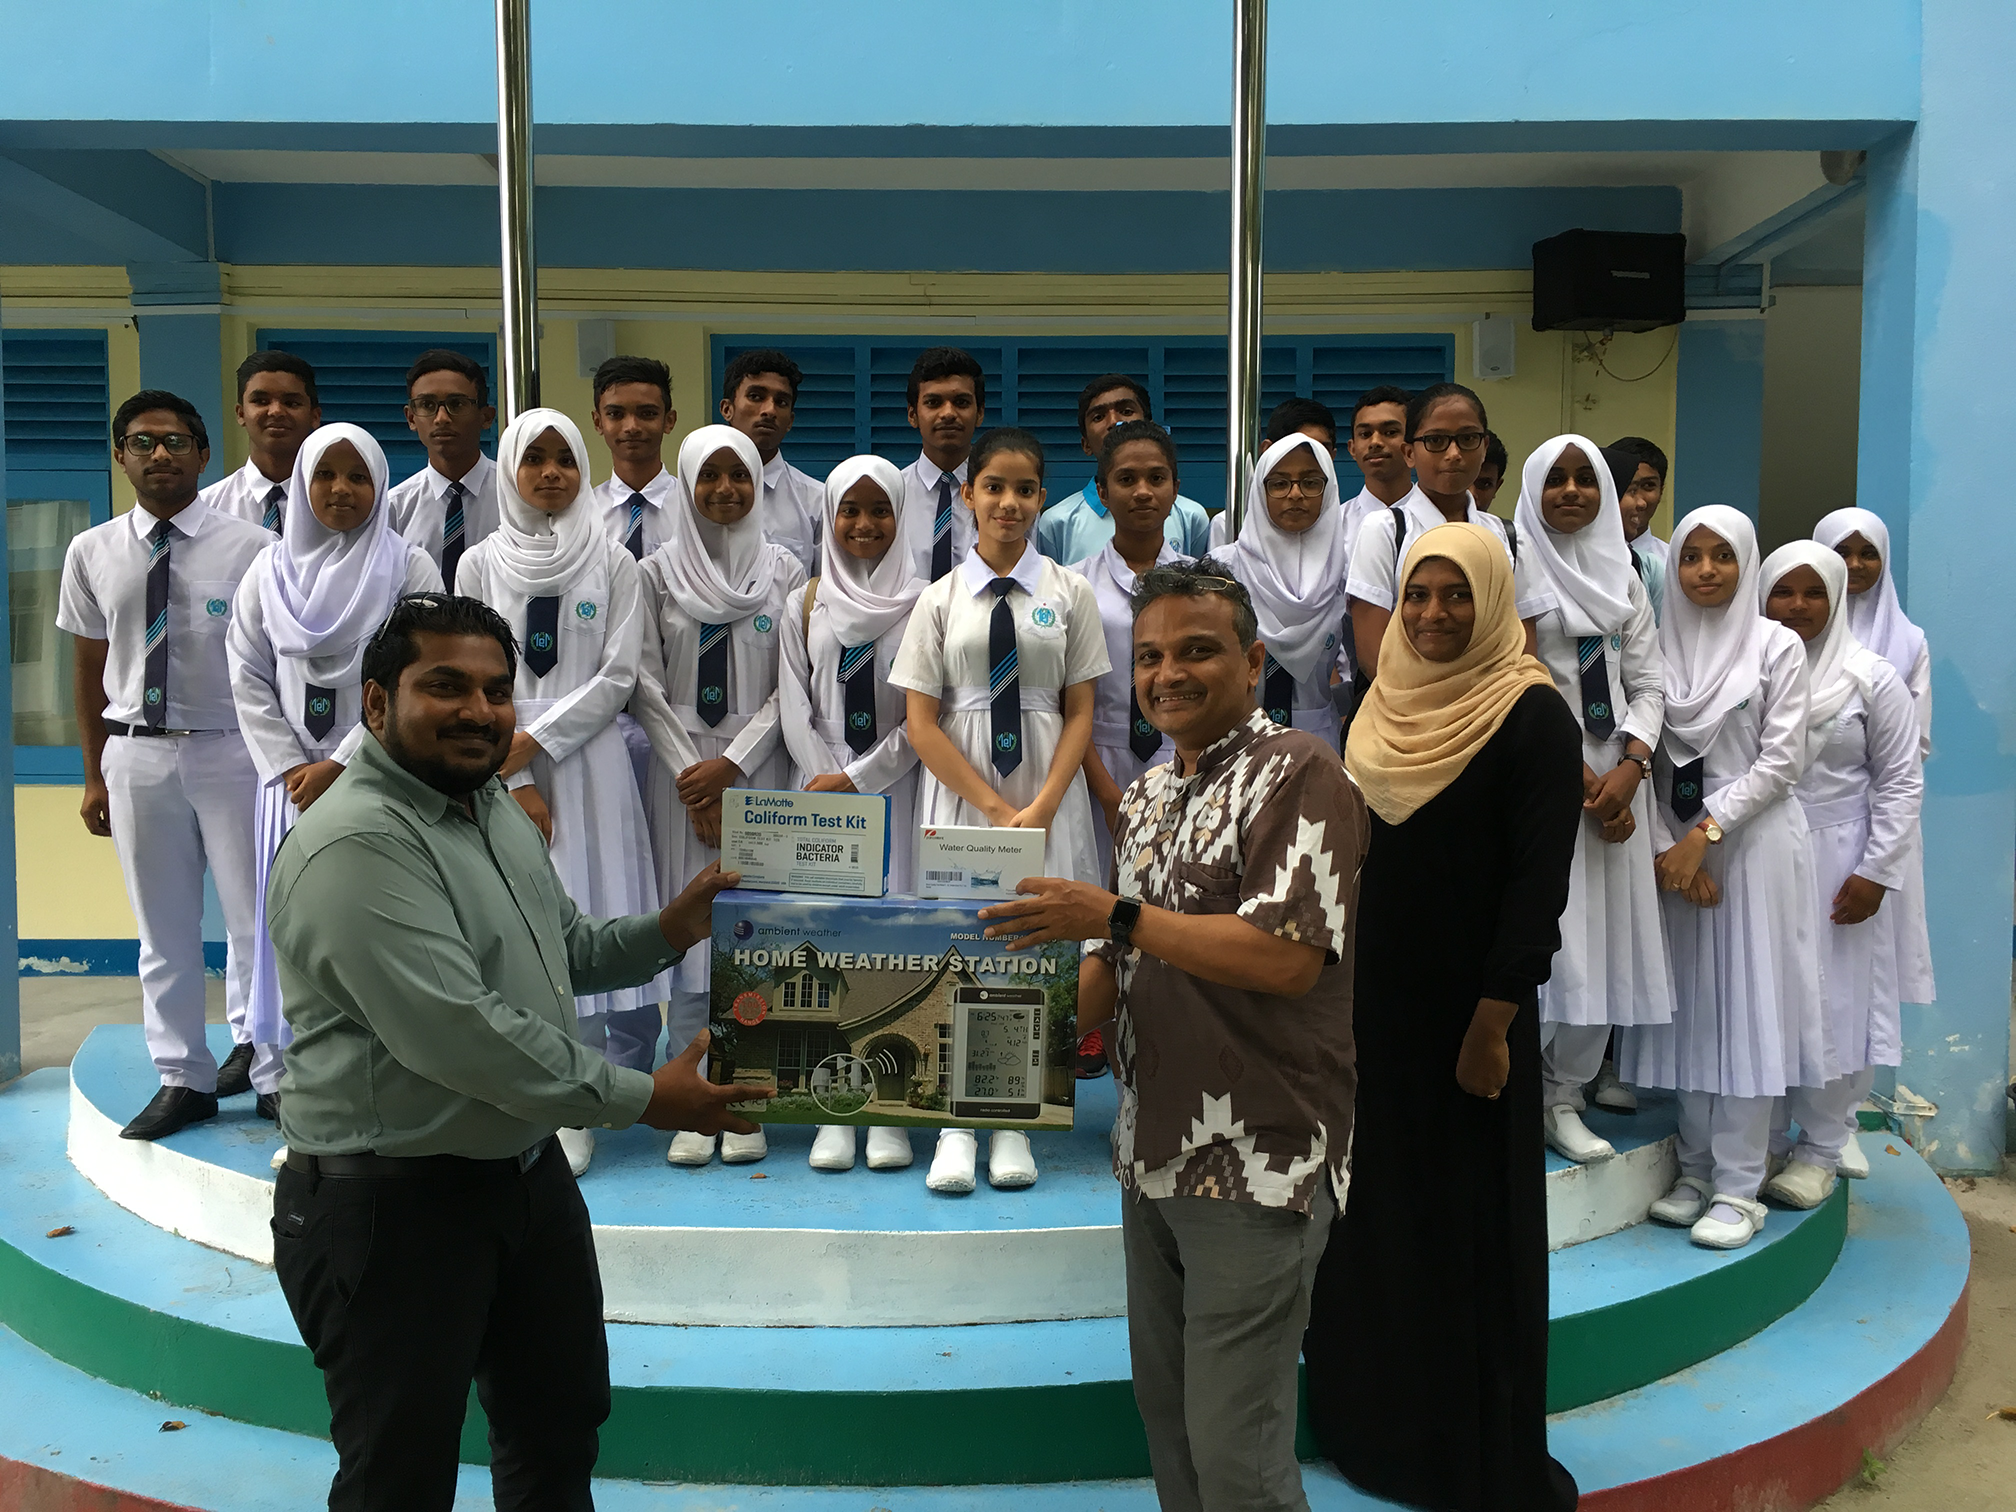 Lareef Zubair hands over the Weather Station, Coliform Kit and 4 in 1 Water Quality Meters to Shifaz Mohamed - Principal at the G. Dh. Atoll Education Center, G. Dh. Thinadhdhoo Maldives.